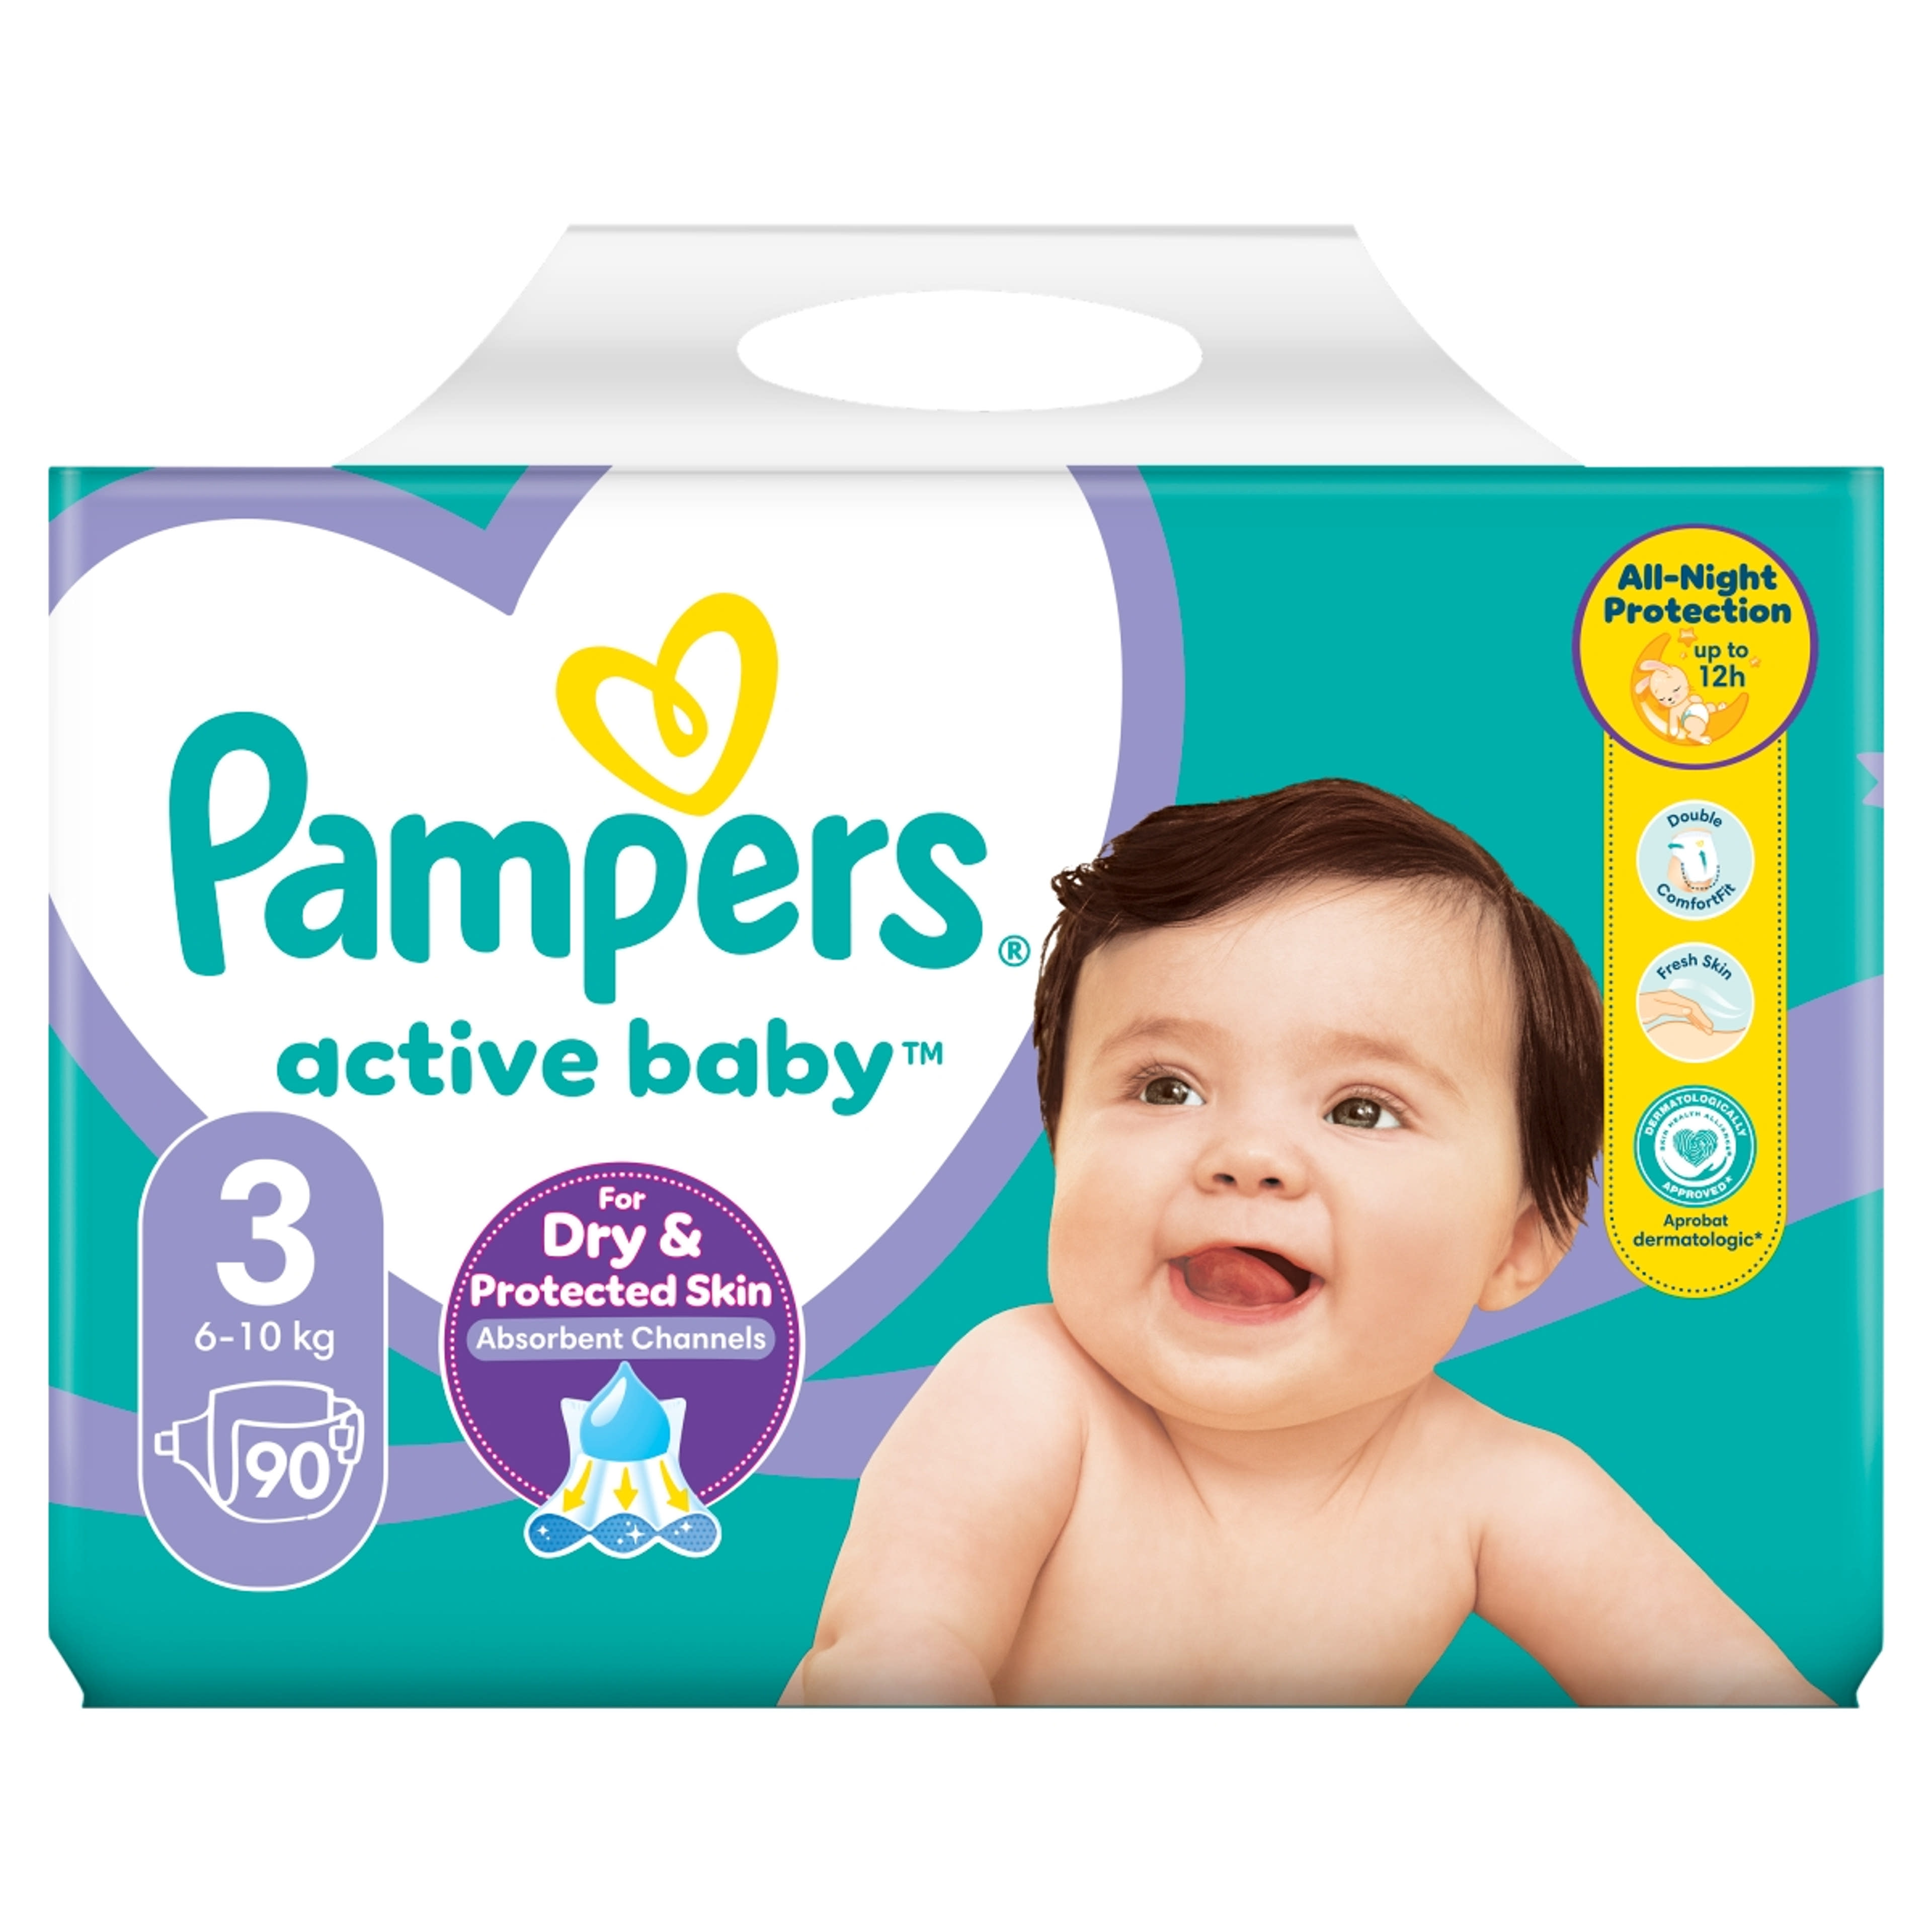 Pampers Active Baby Giant Pack Pelenka 3 - 90 db-1